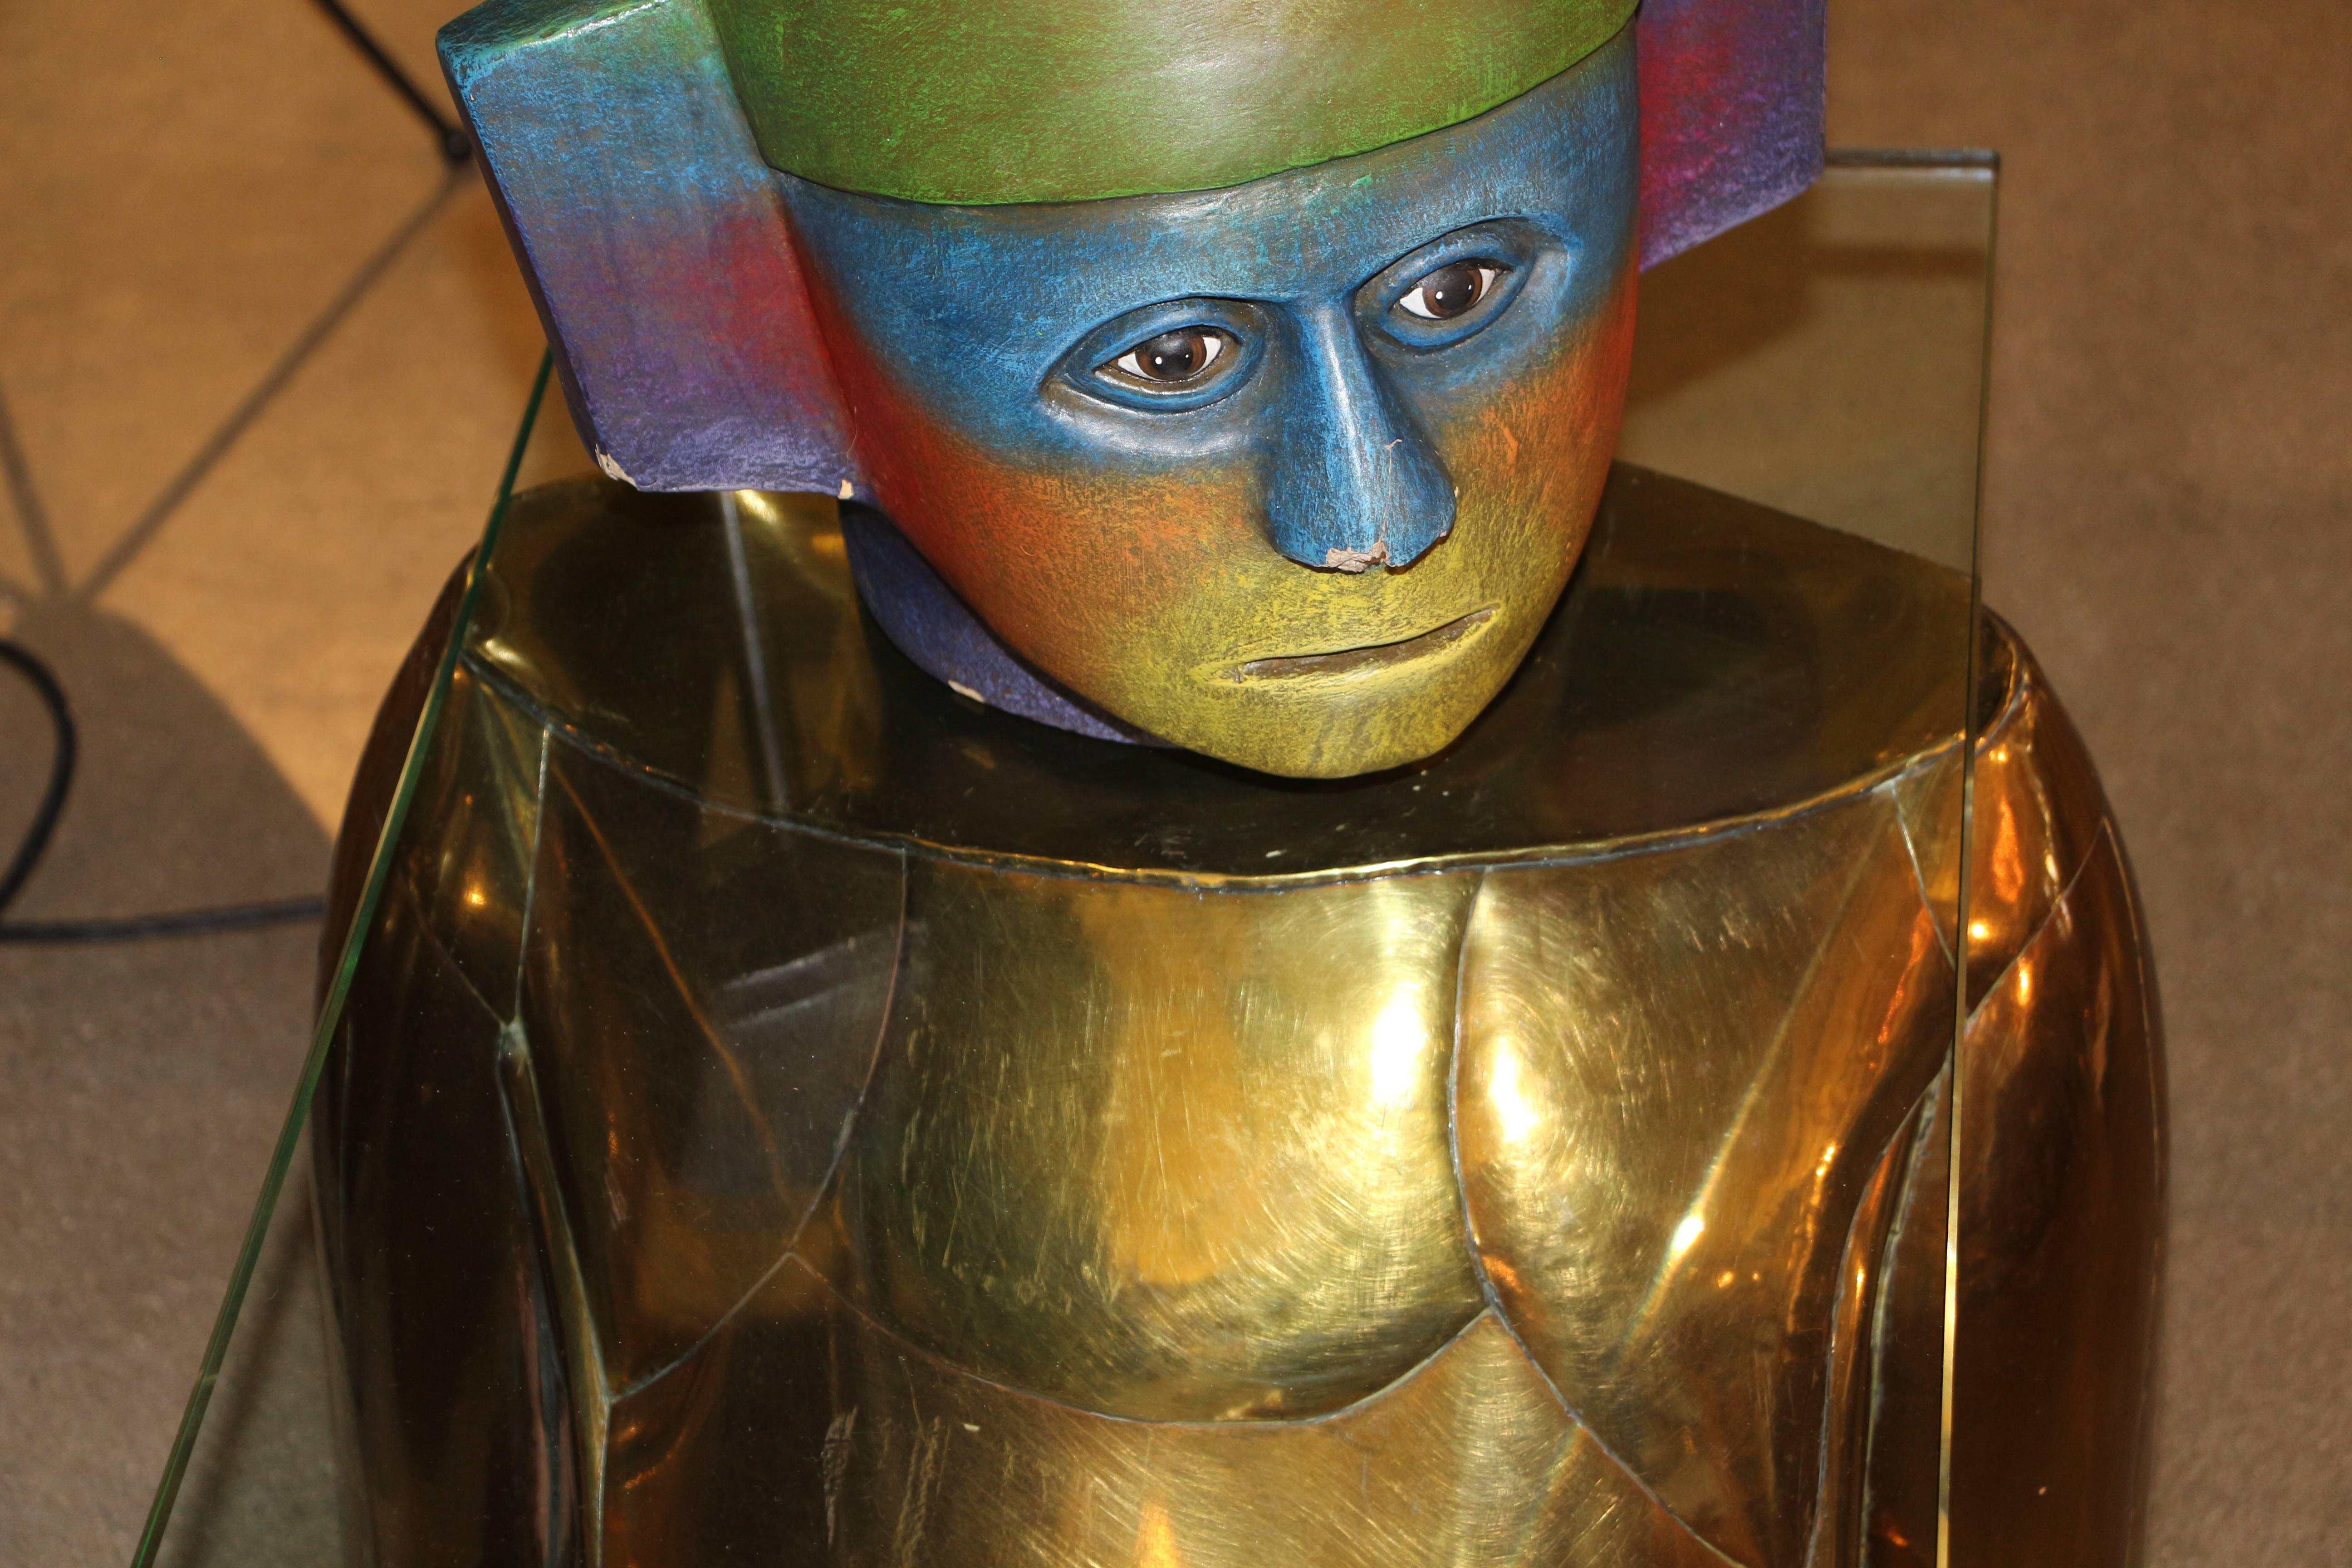 An unusual Mario Gonzales brass, copper and ceramic painted head table. The head rests on the glass. The head has damage to the nose area, but the table can be used without the head. The copper inset has glass eyes. It is signed.
Measures: Table is